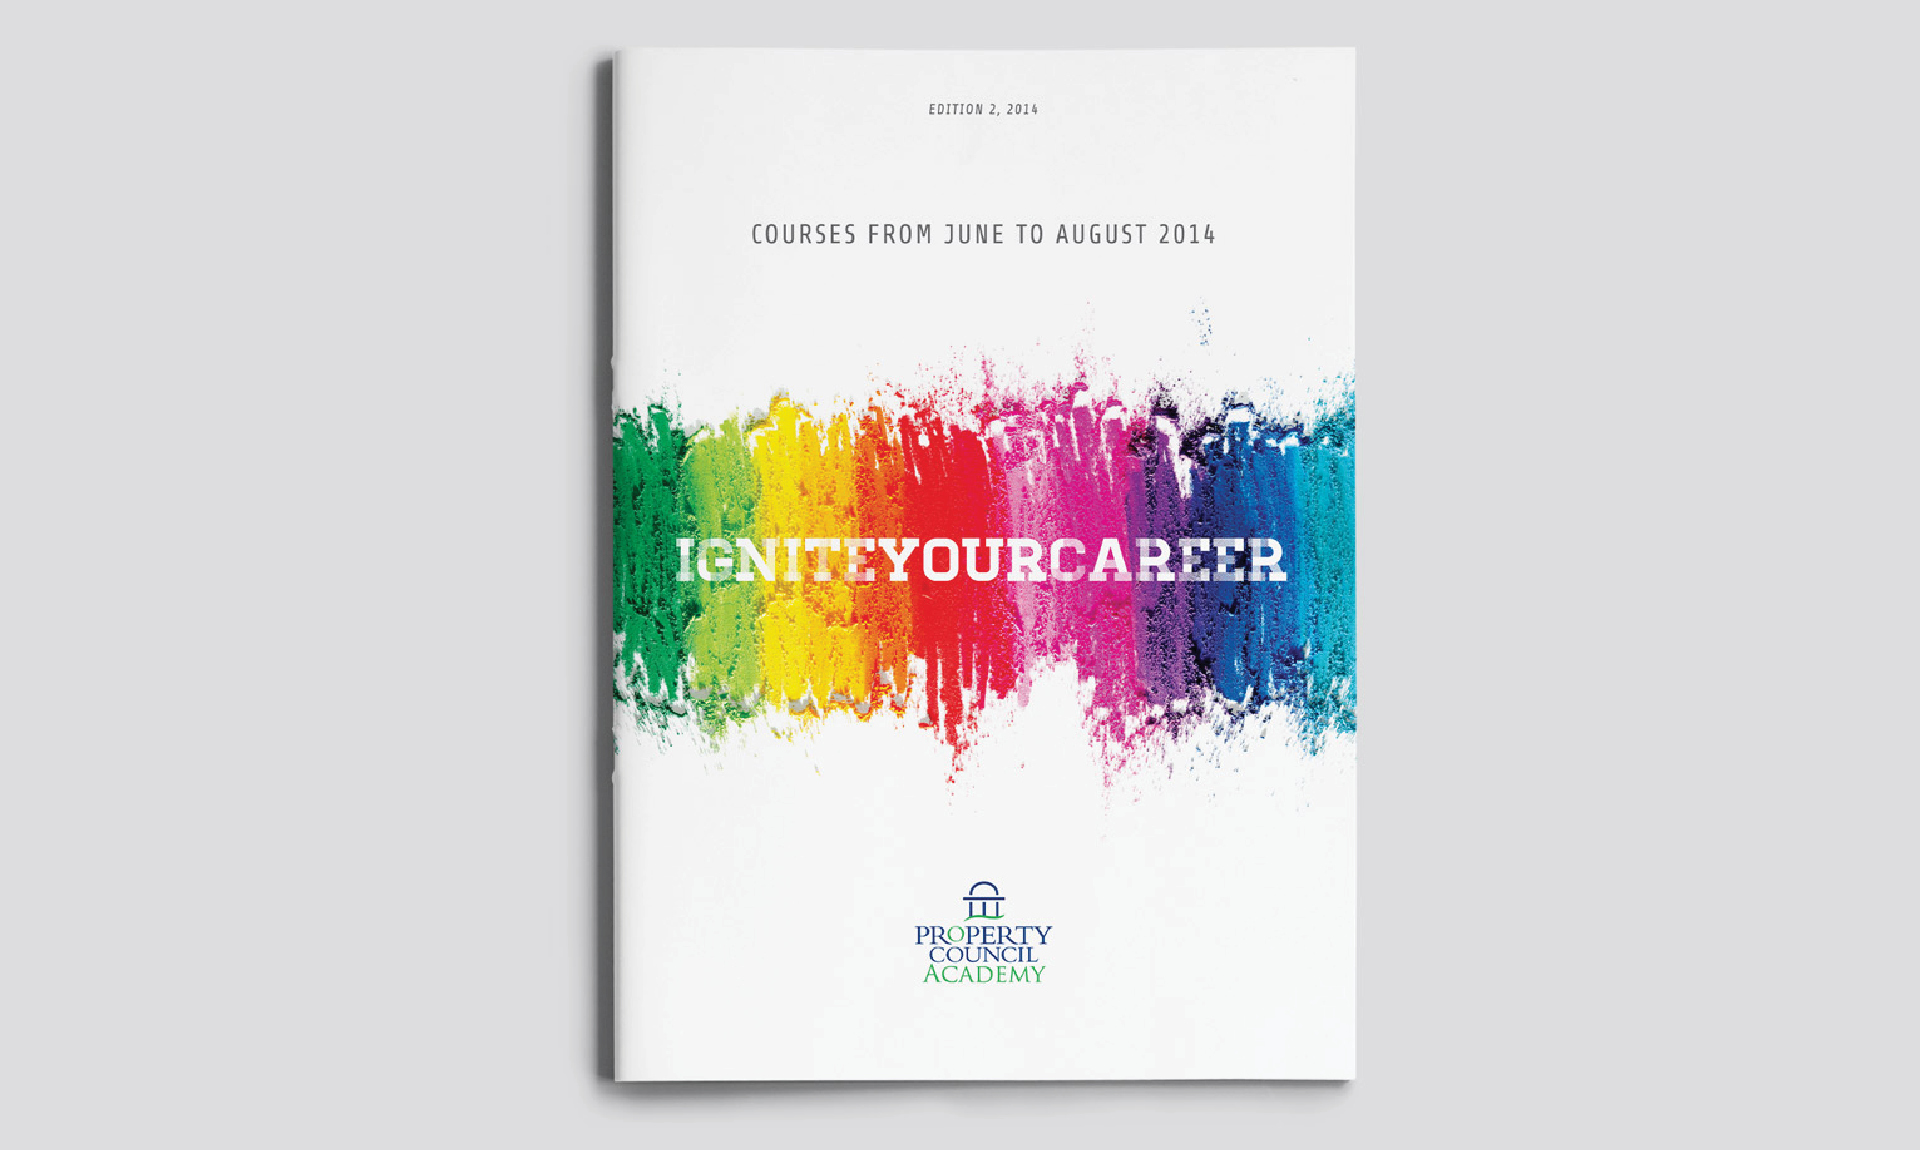 Property Council Academy 2014 Courses Collateral by Think Creative Agency